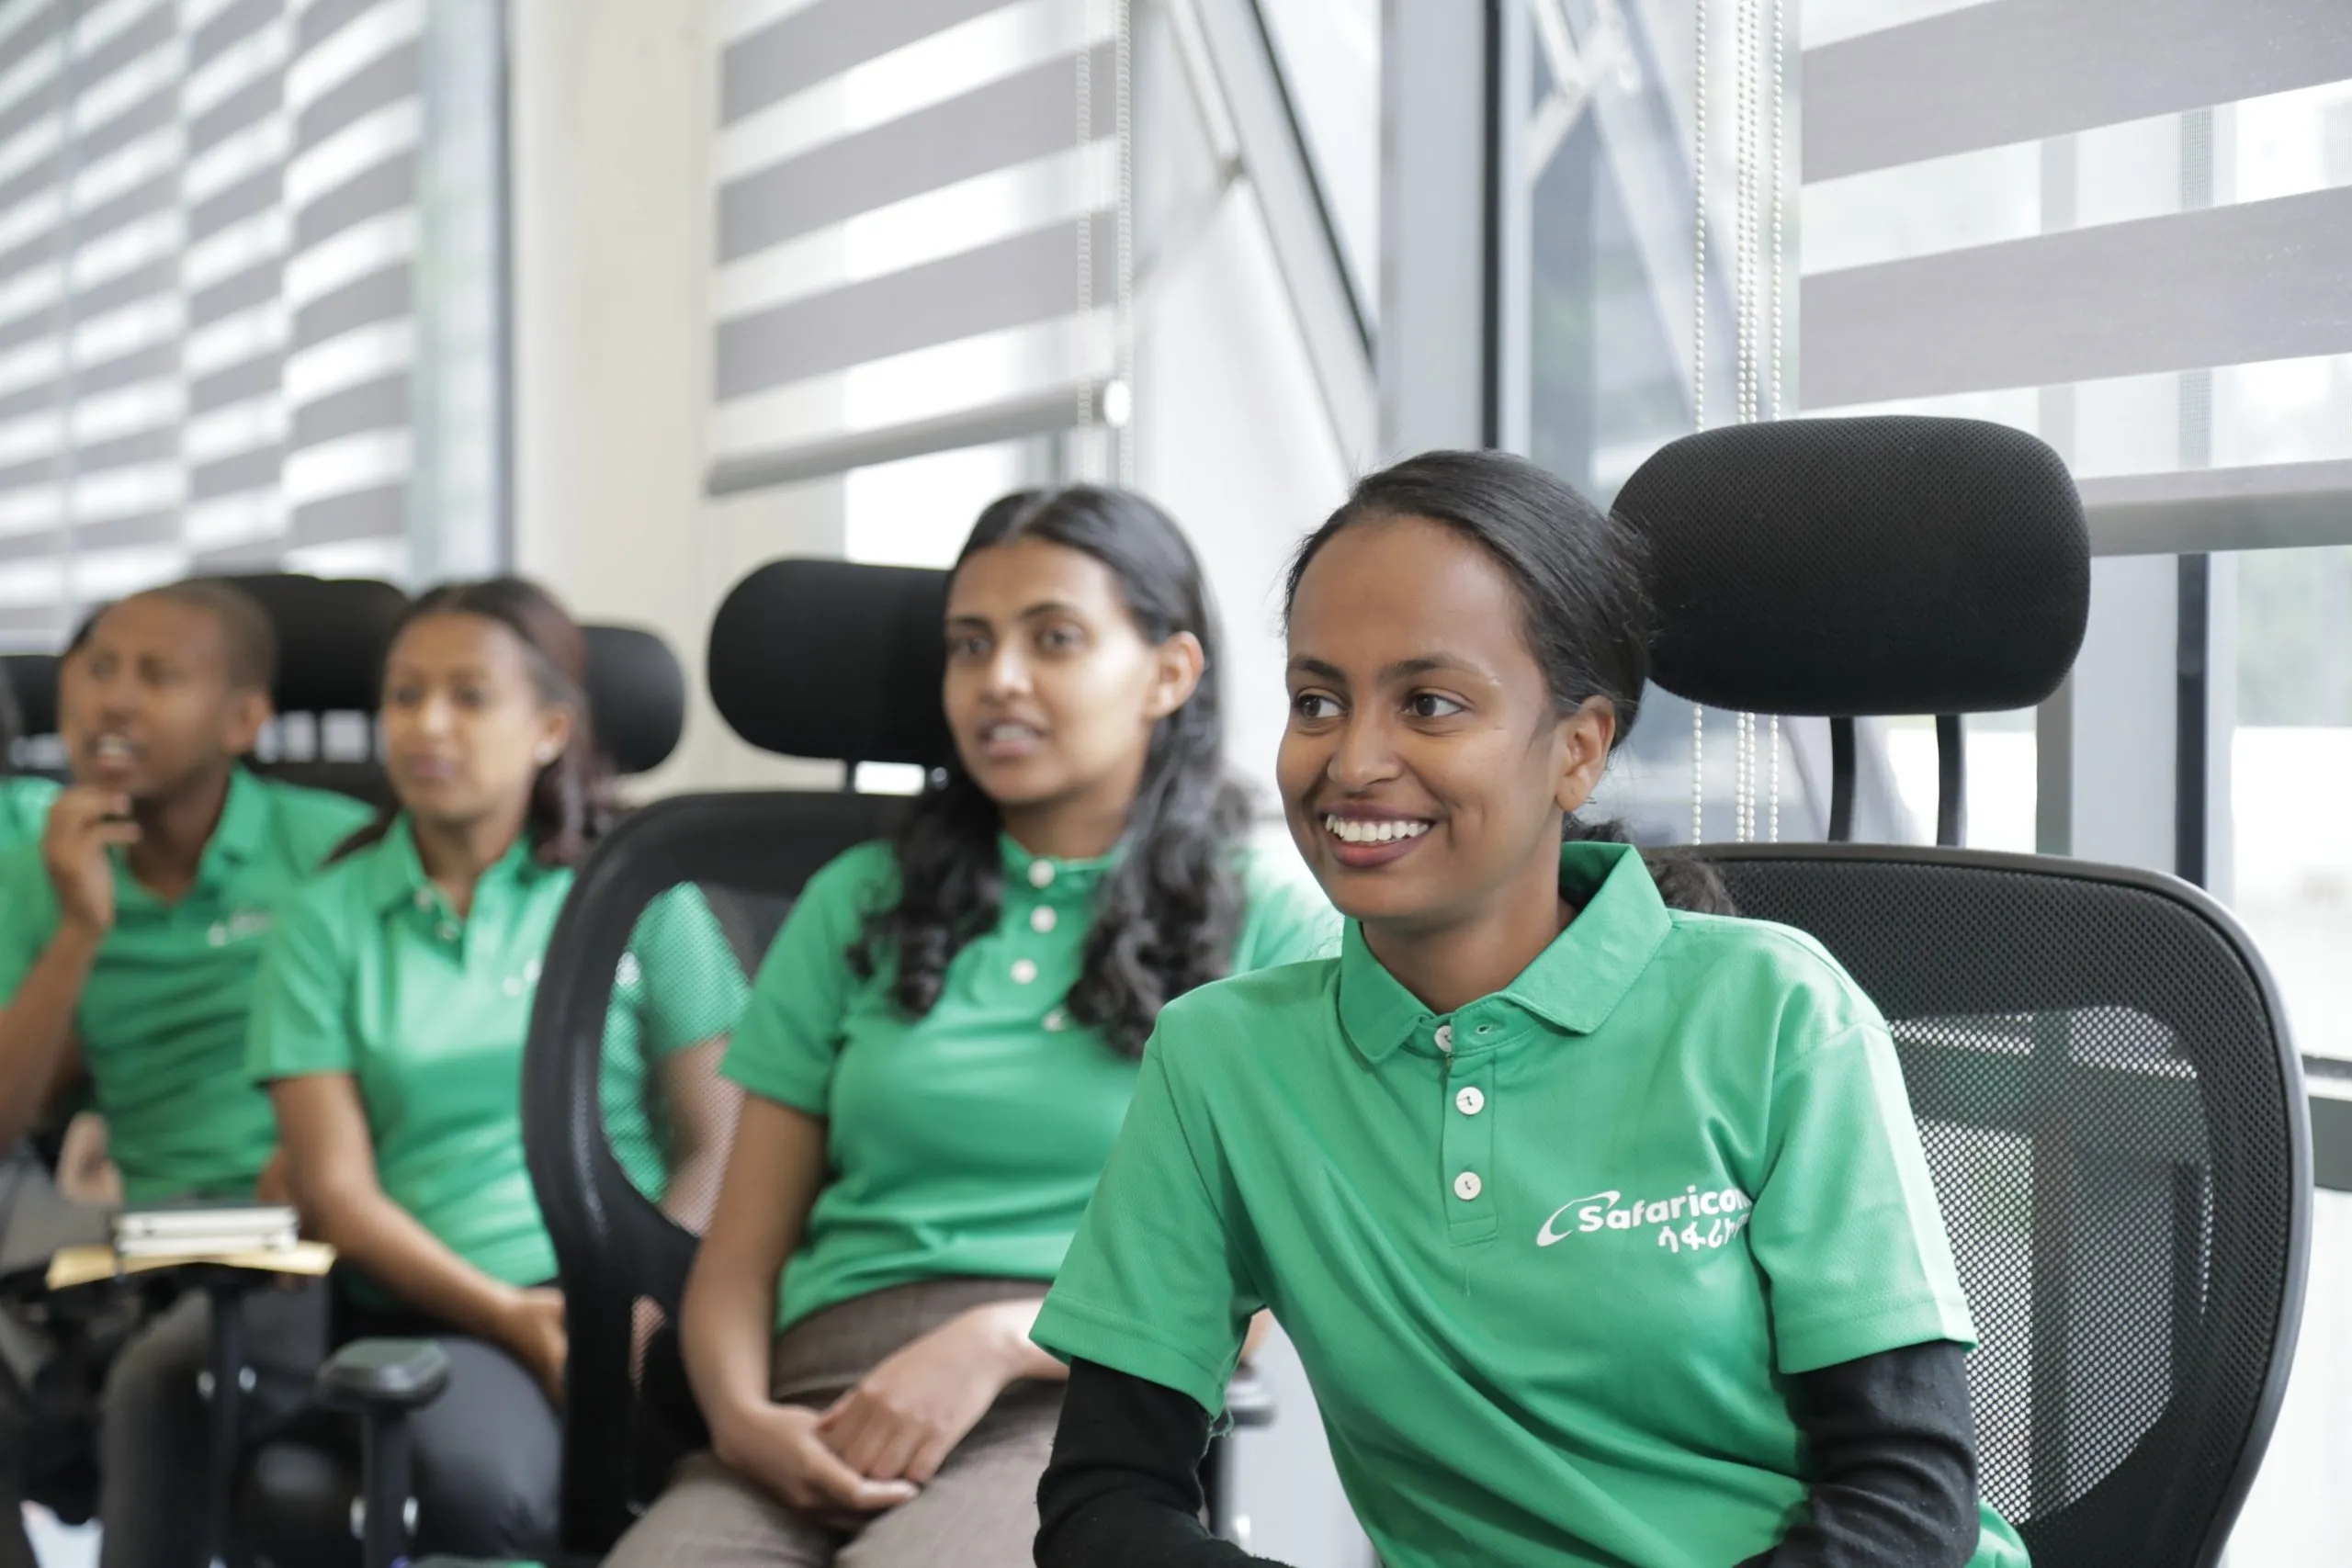 Safaricom Ethiopia aims to replicate its success in Kenya, where it has played a pivotal role in driving financial inclusion, digital payments, and internet connectivity.